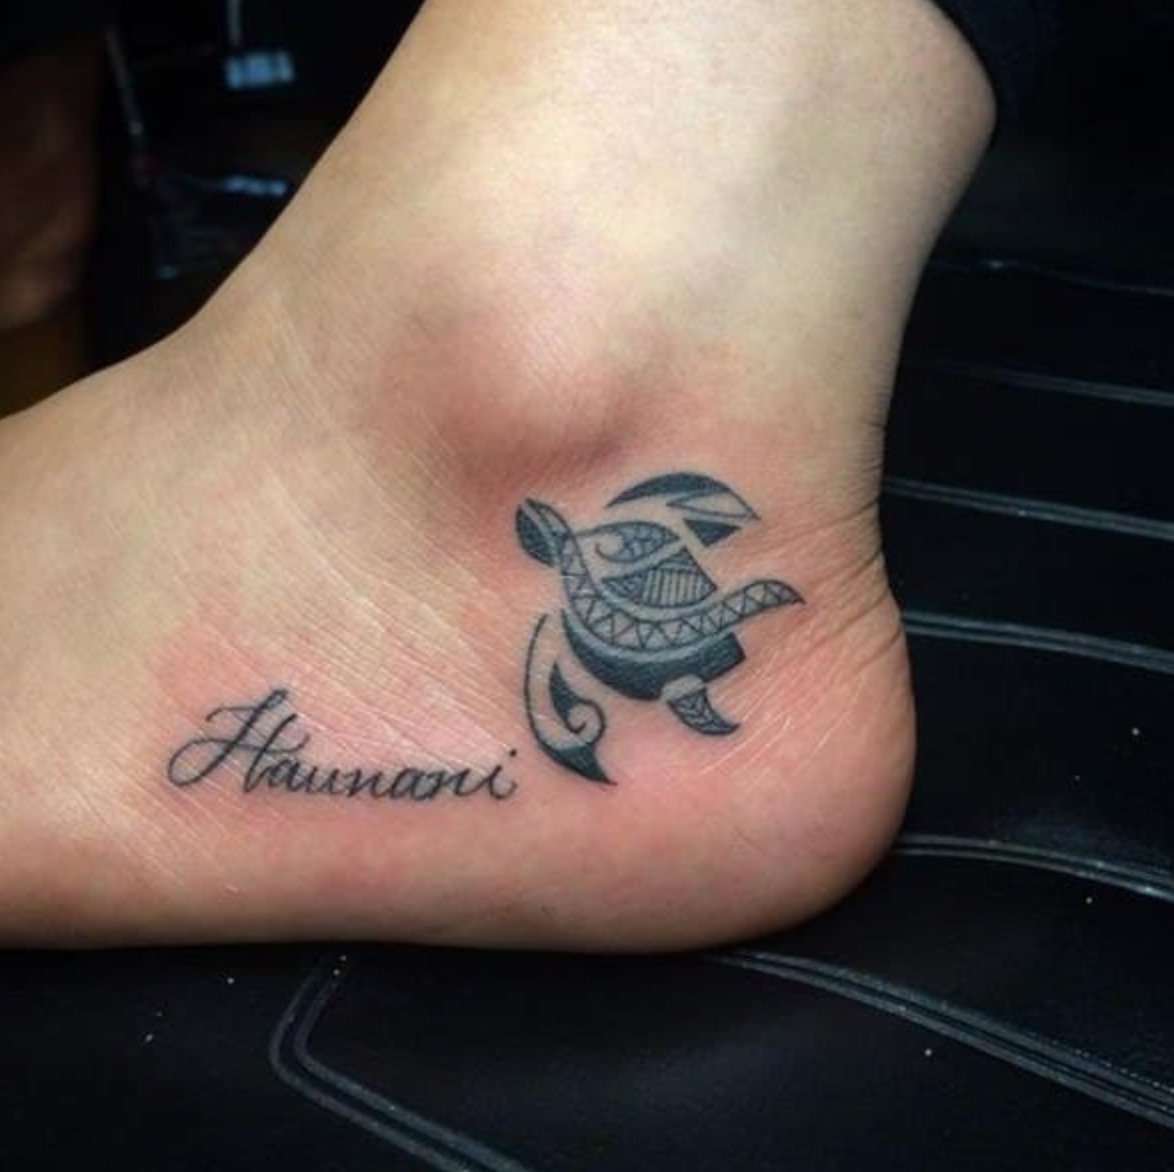 More Women Are Getting Feet Tattoos